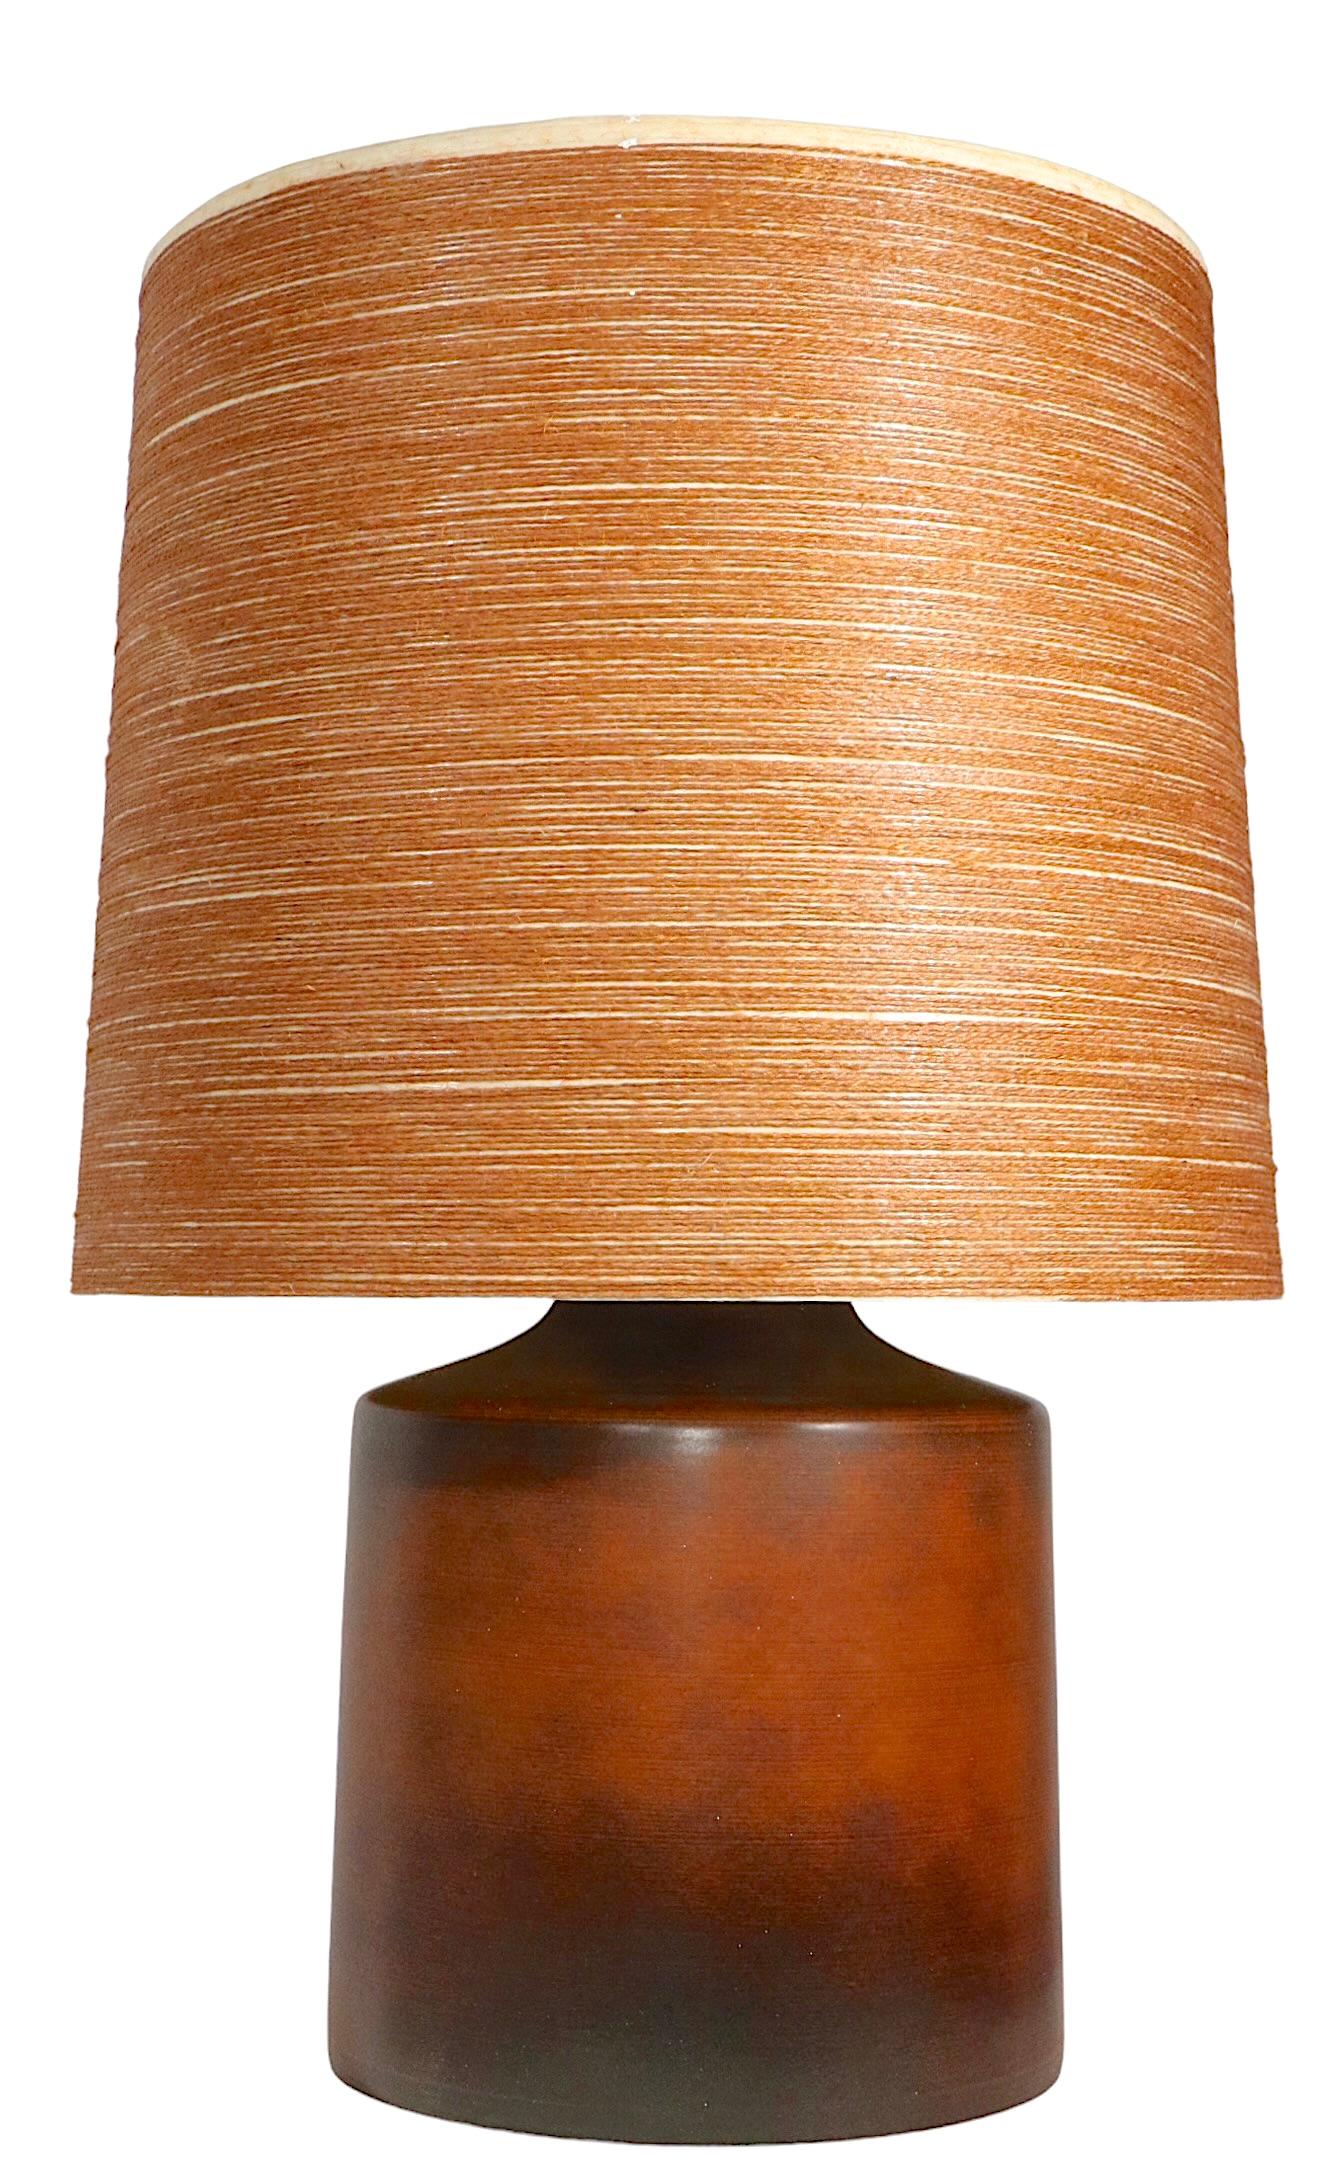 Ceramic Mid-Century Table Lamp with Original Shade by Lotte & Gunnar Bostlund For Sale